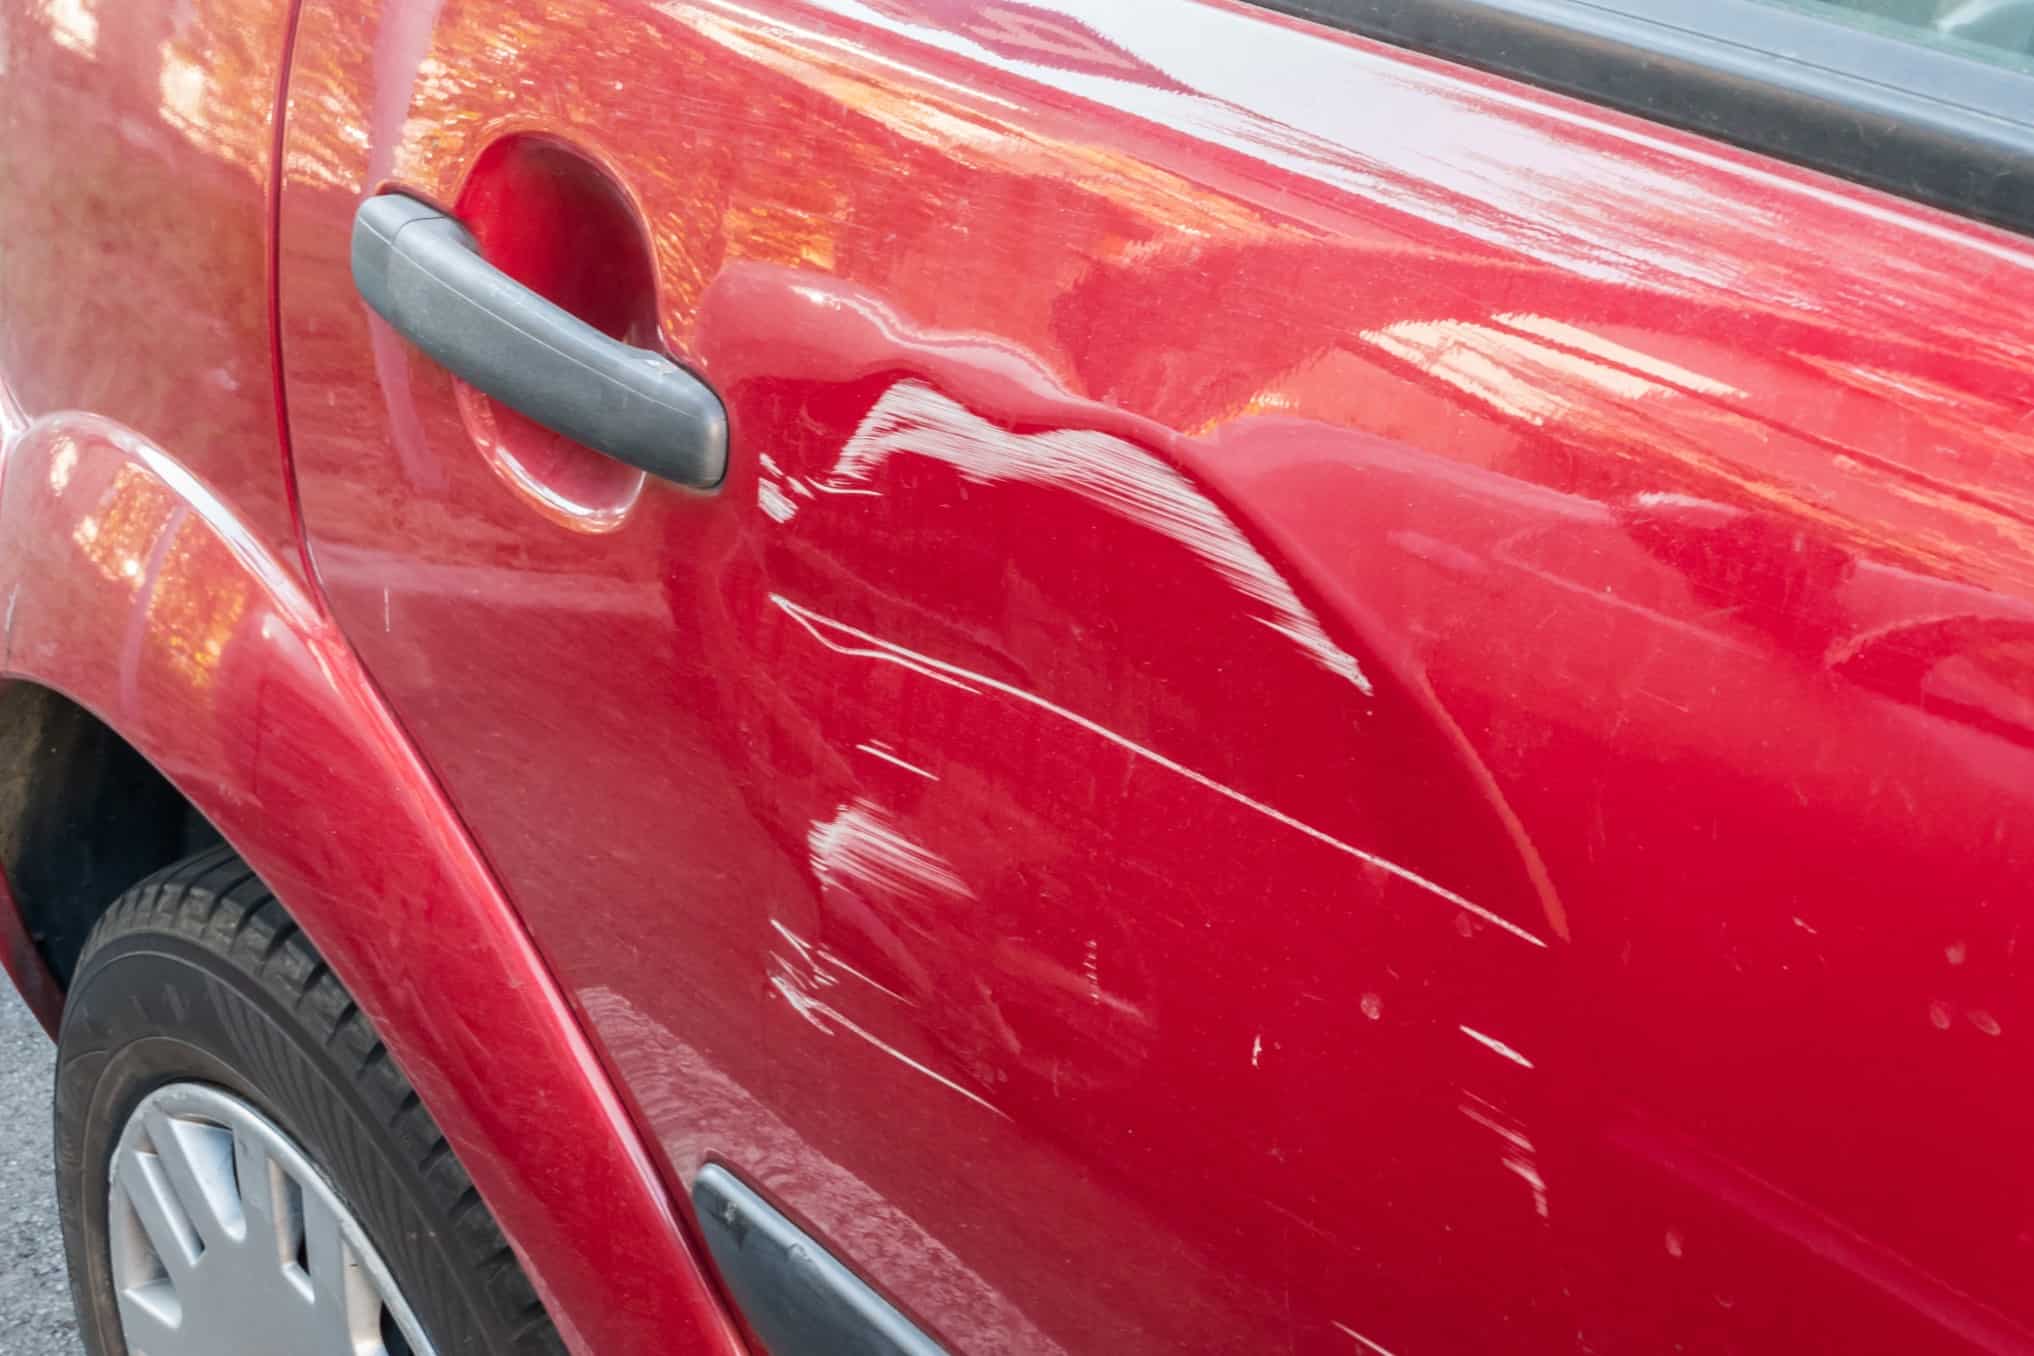 Myths And Facts Of DIY Car Dent Removal